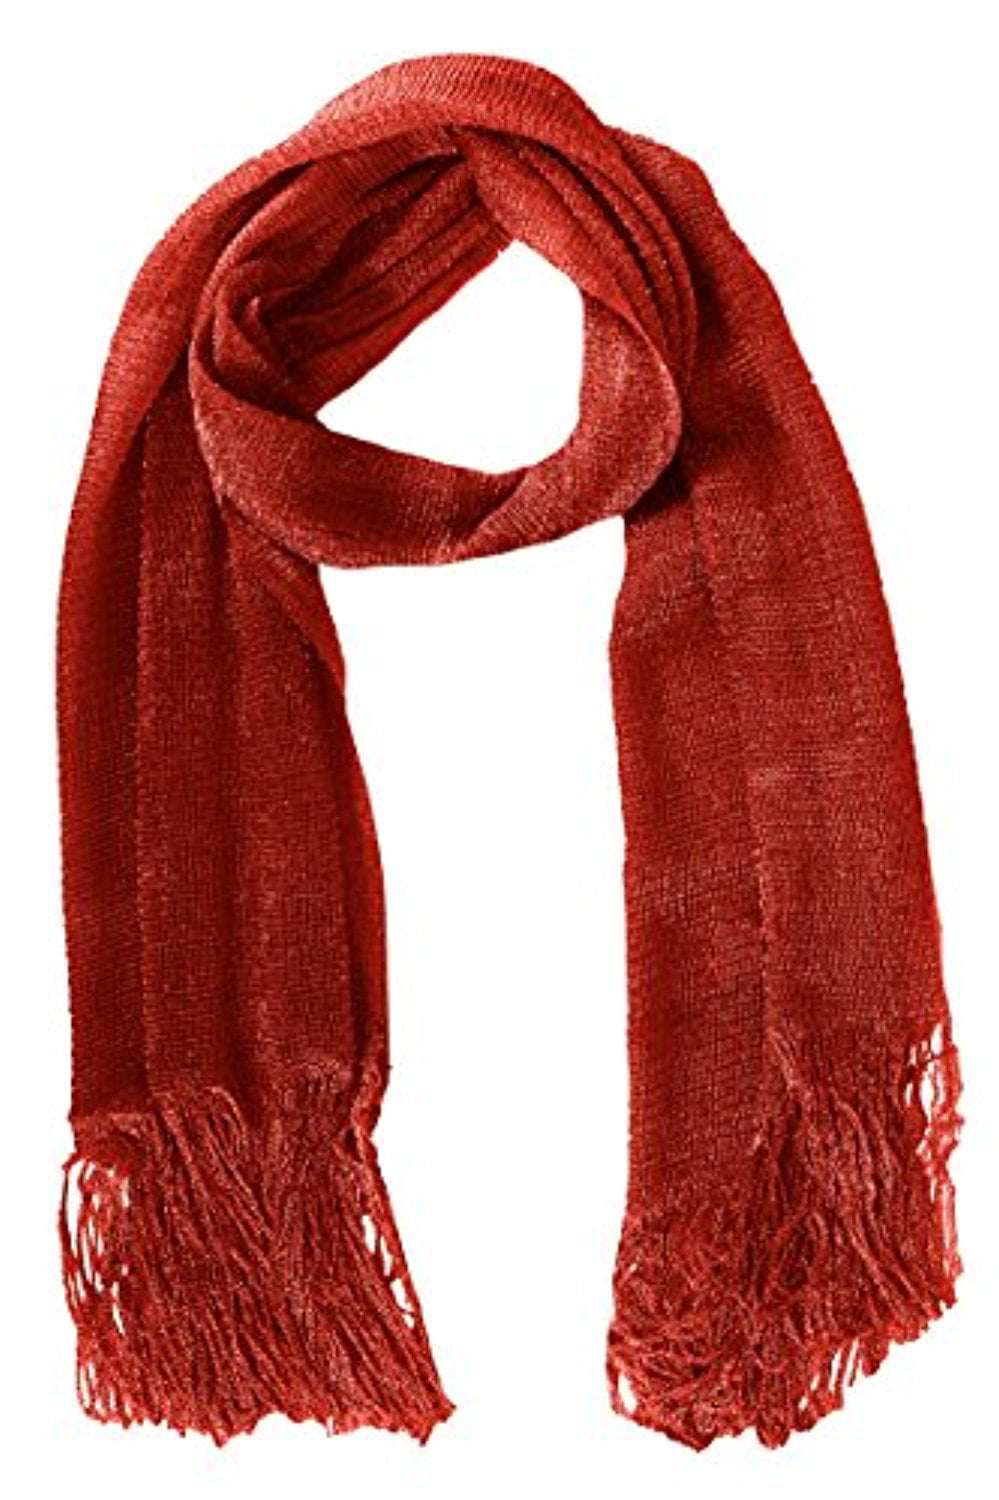 LONG SHIMMERY MESH SCARF WRAP 2-PACK SET 